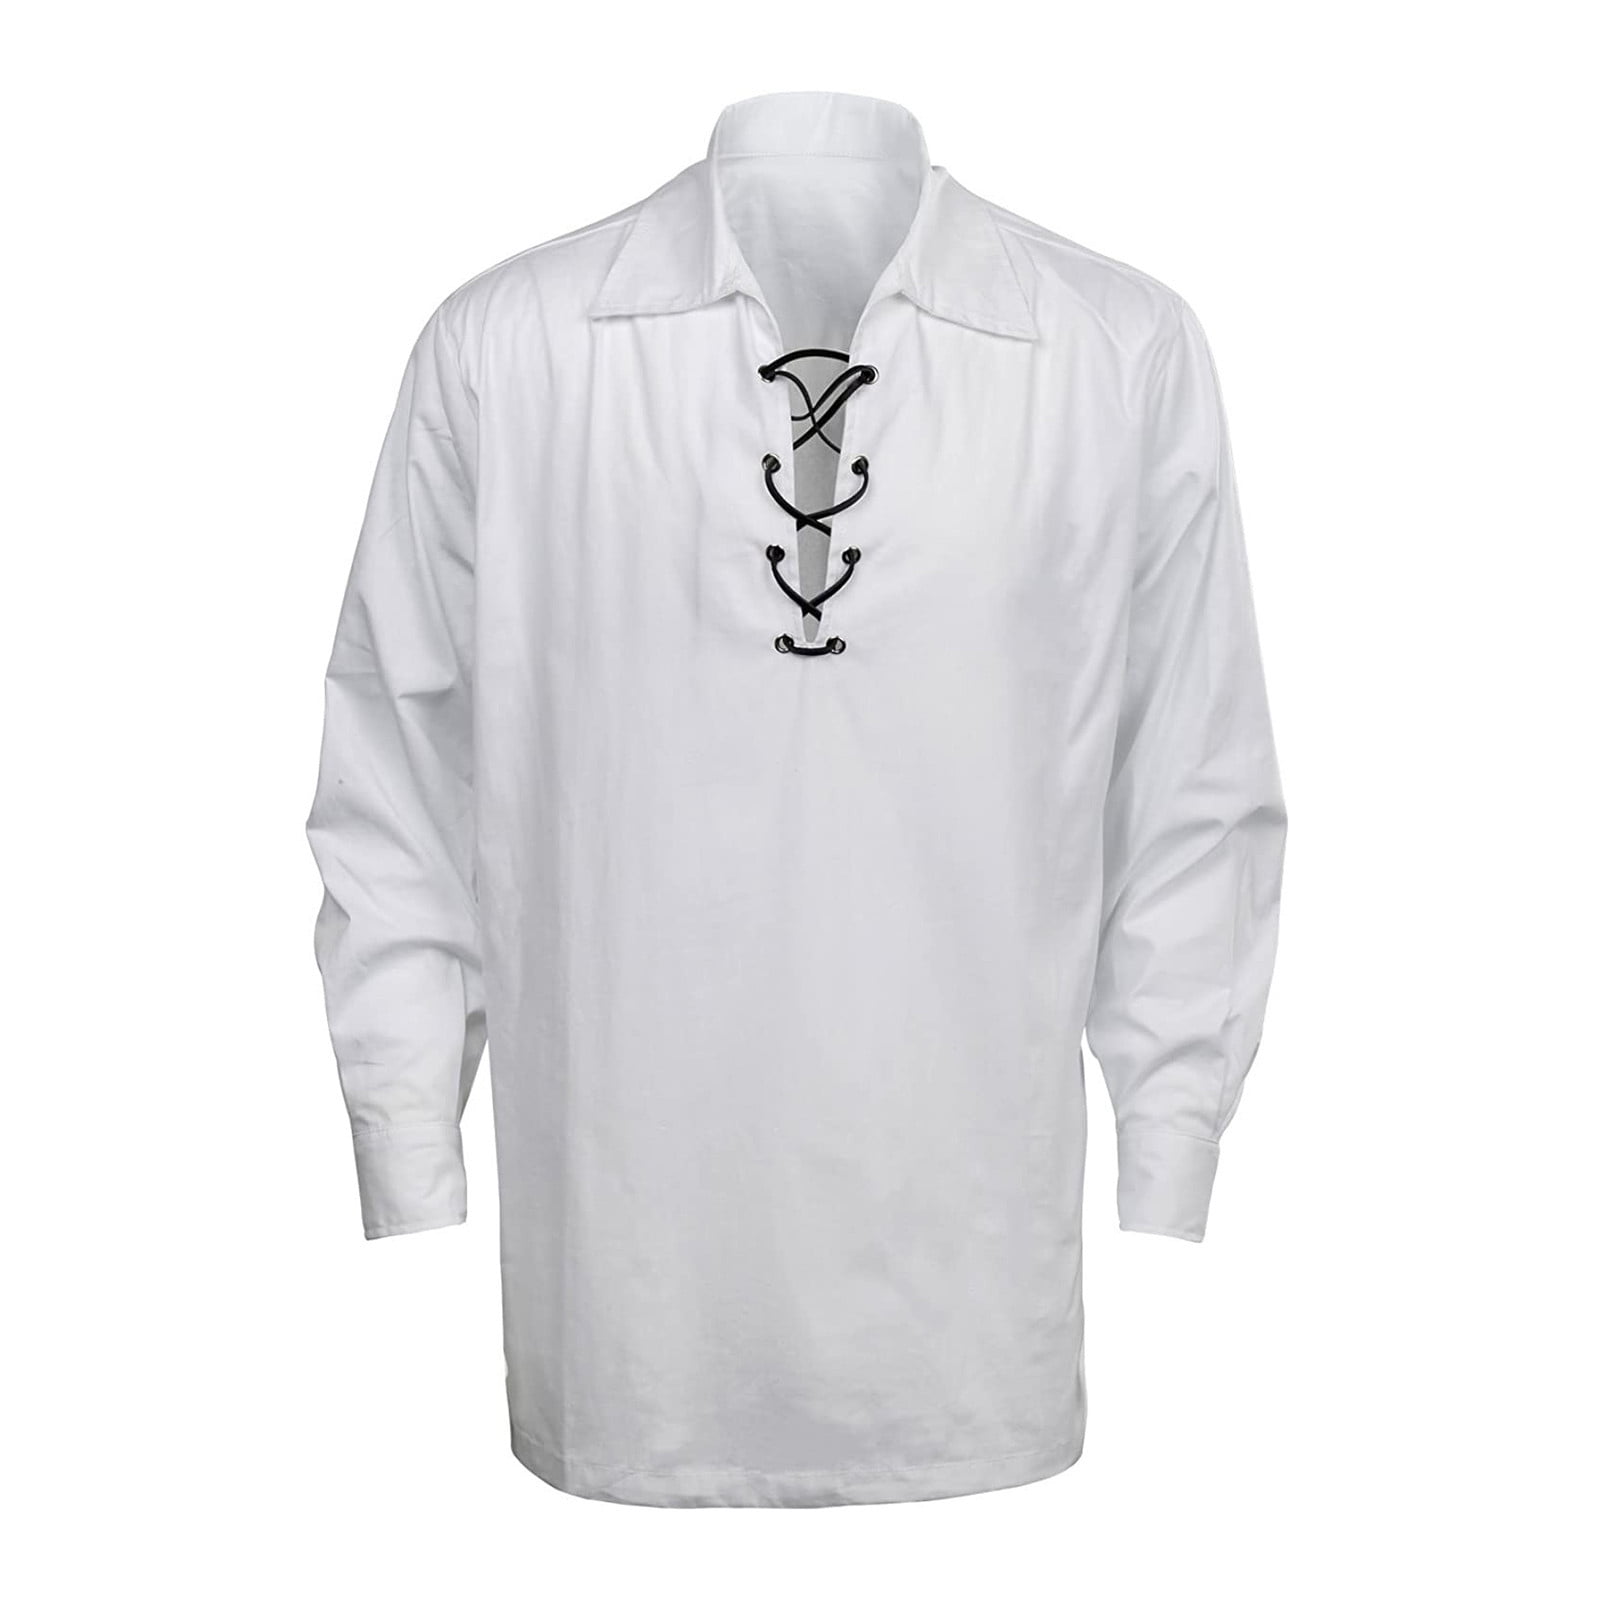 Mens Lace Up Ruffle Shirt Tops Long Sleeve Costume Gothic Steampunk Retro Tee 